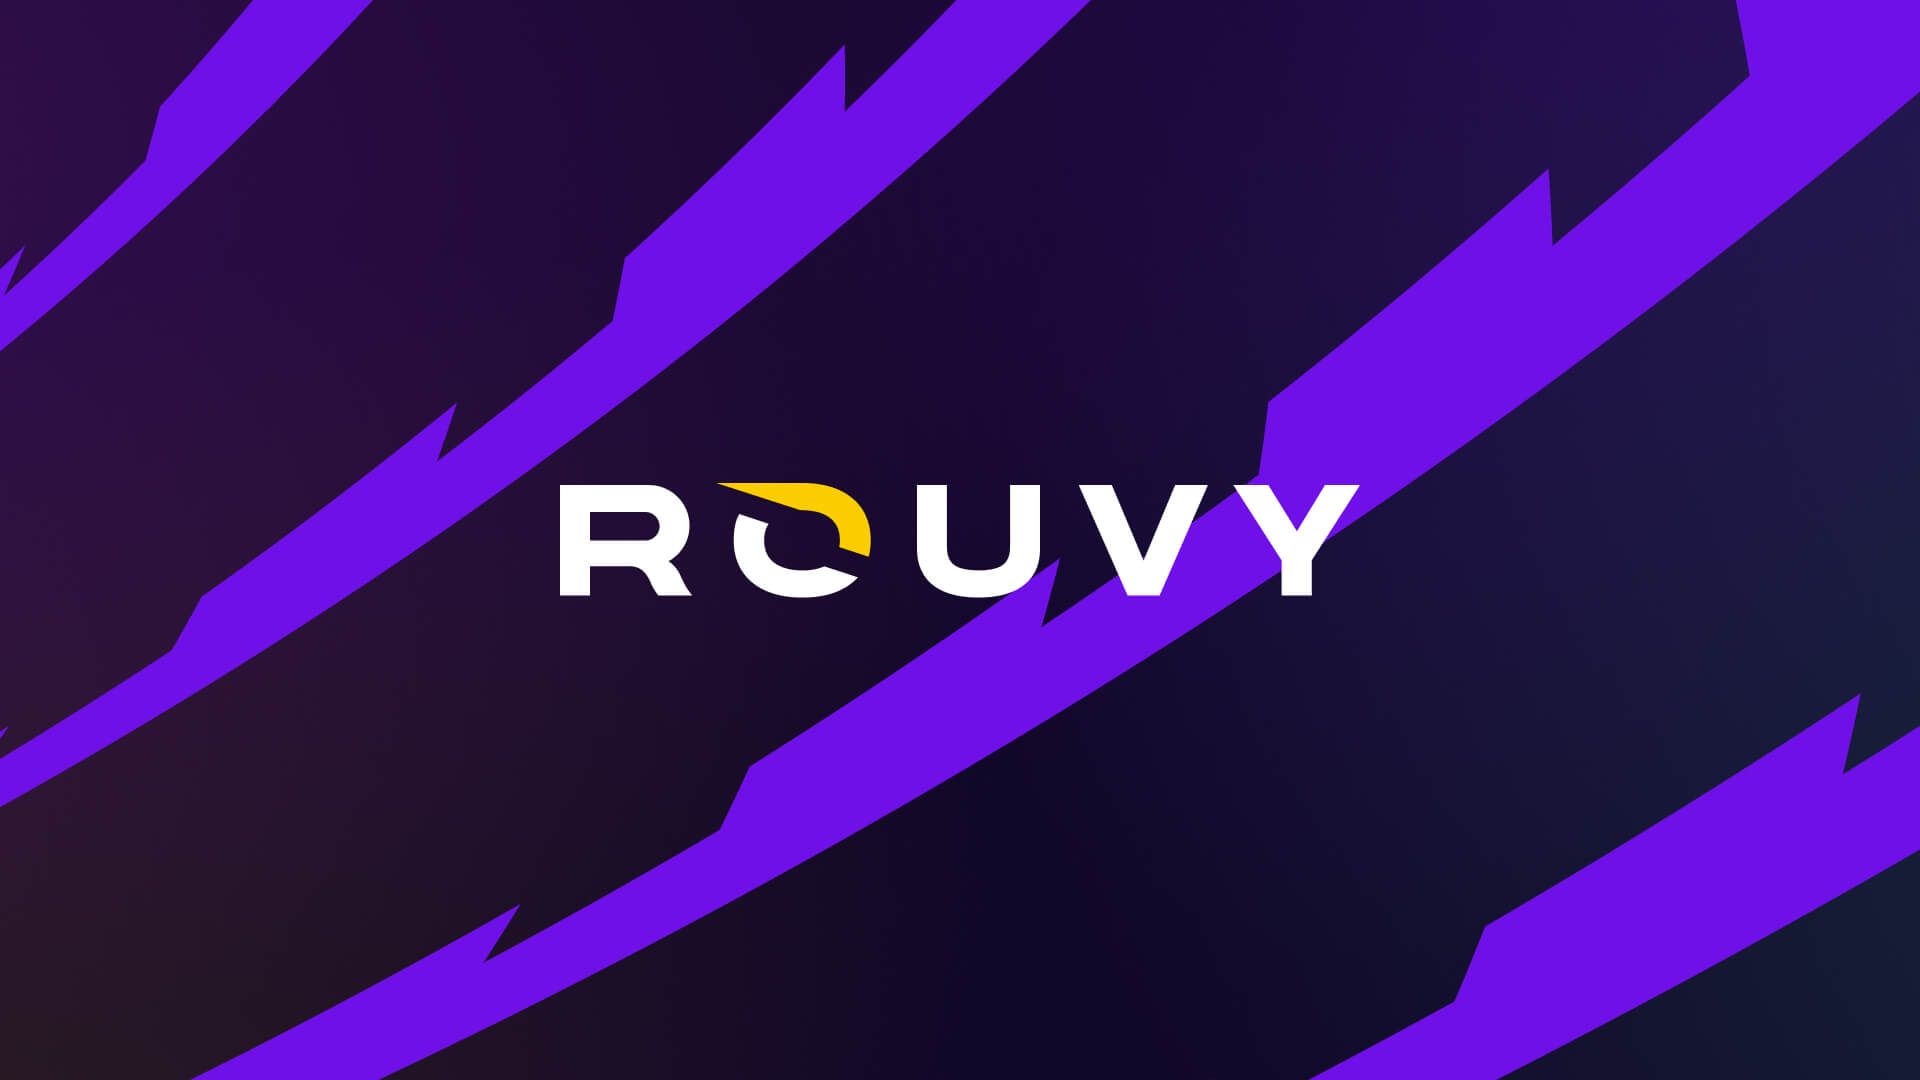 ROUVY Reimagines Look and Brand to Better Reflect its Immersive Experience for Indoor Cyclists